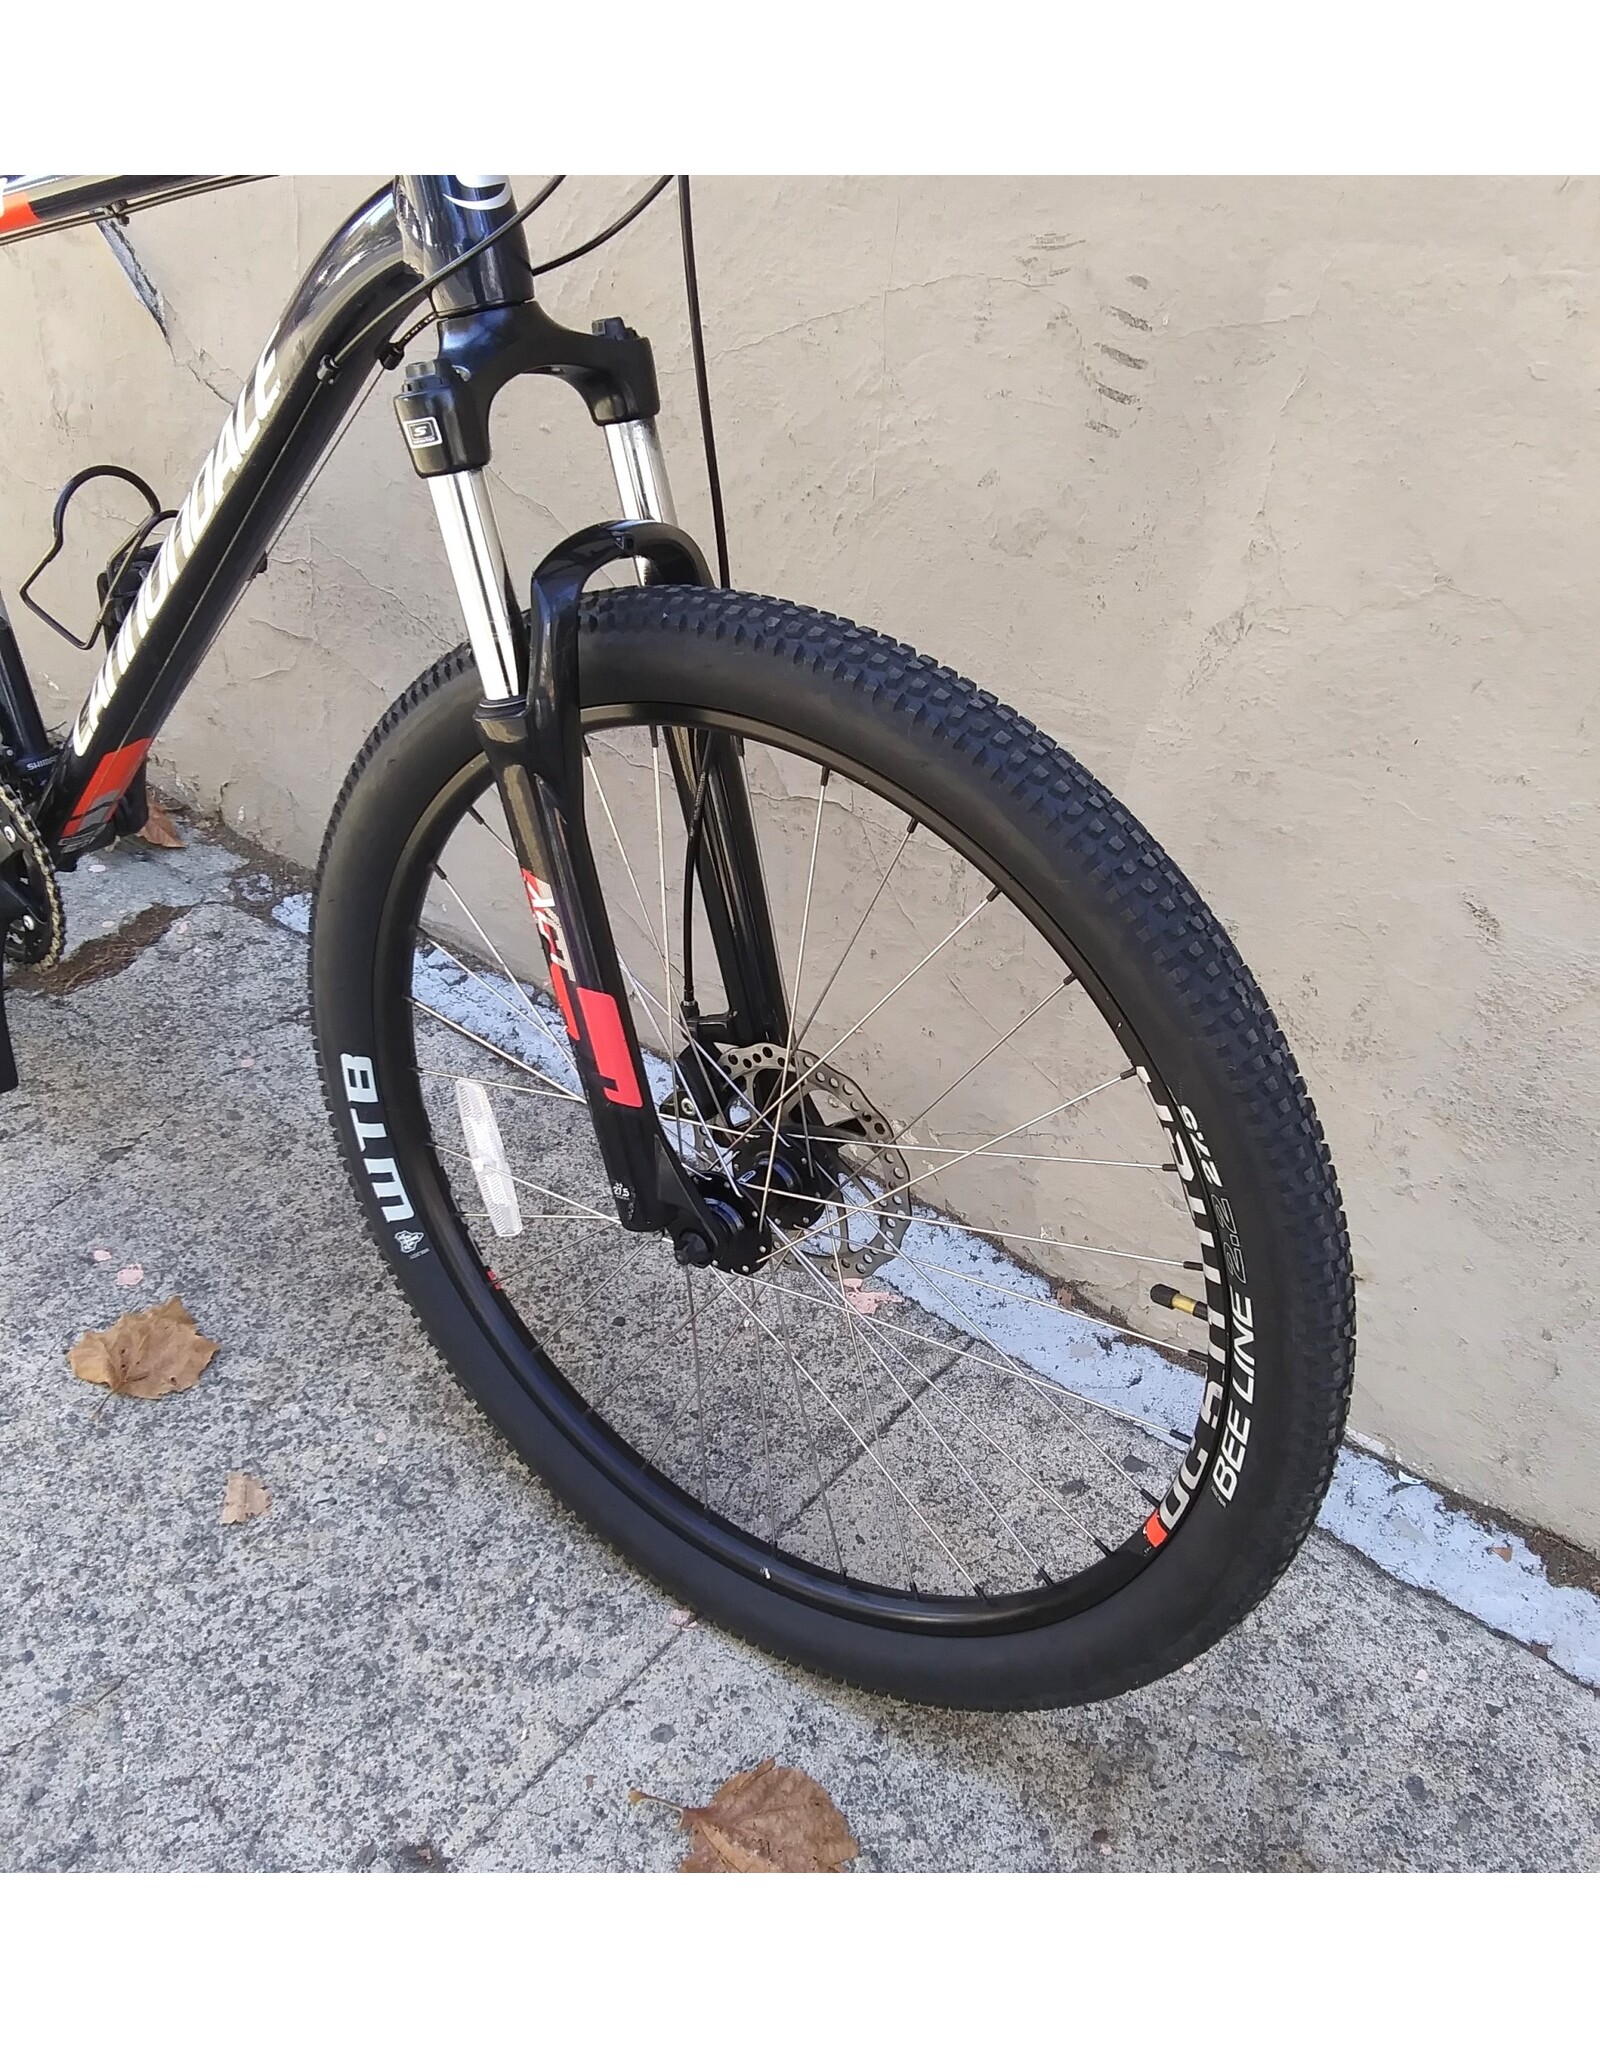 Cannondale Cannondale Trail 7 27.5, 2016, 19 Inches, Black